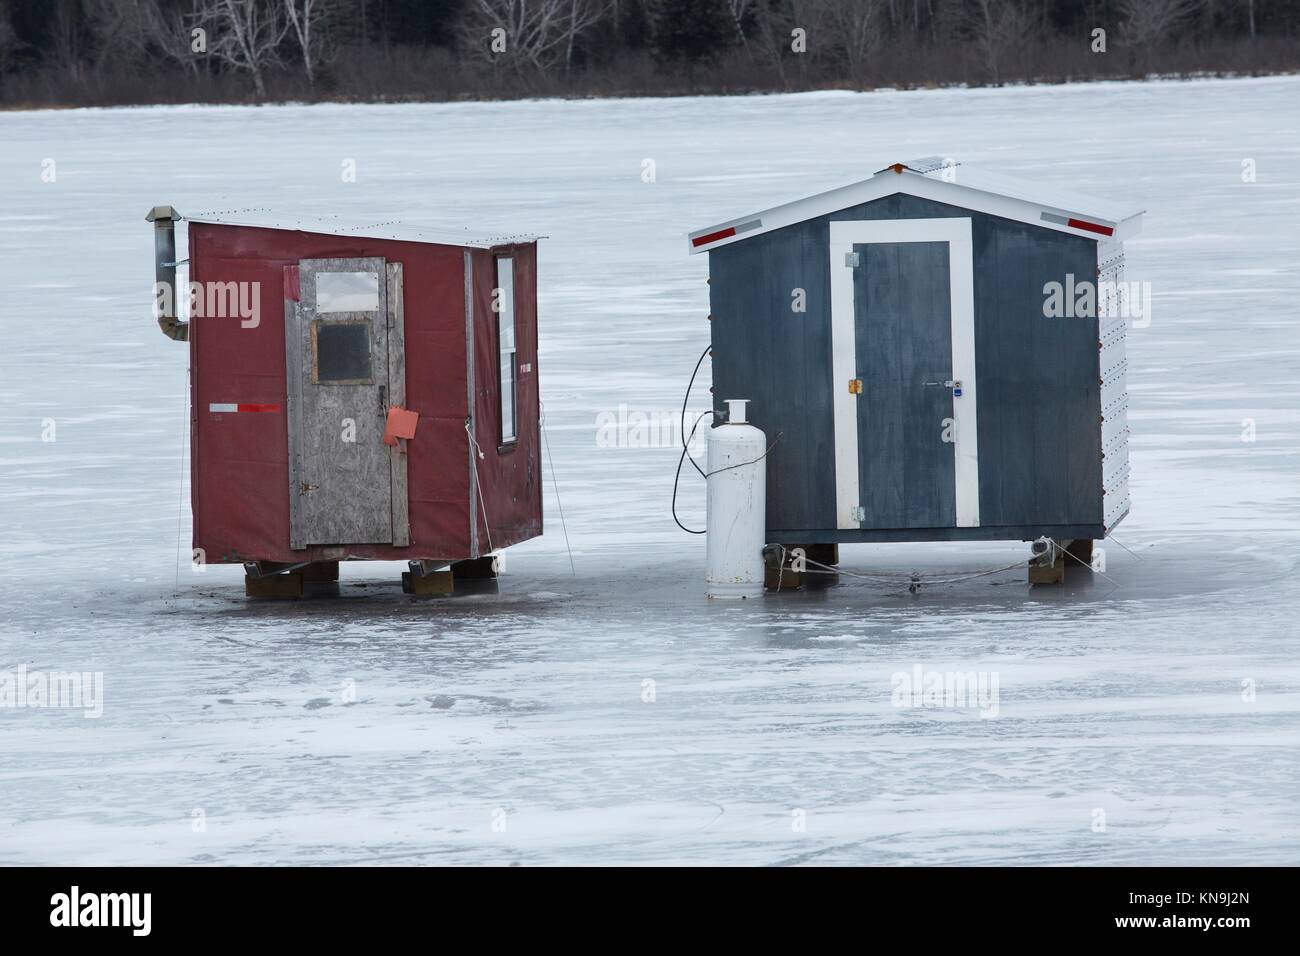 https://c8.alamy.com/comp/KN9J2N/two-red-and-gray-ice-fishing-shelters-sit-side-by-side-on-the-ice-KN9J2N.jpg